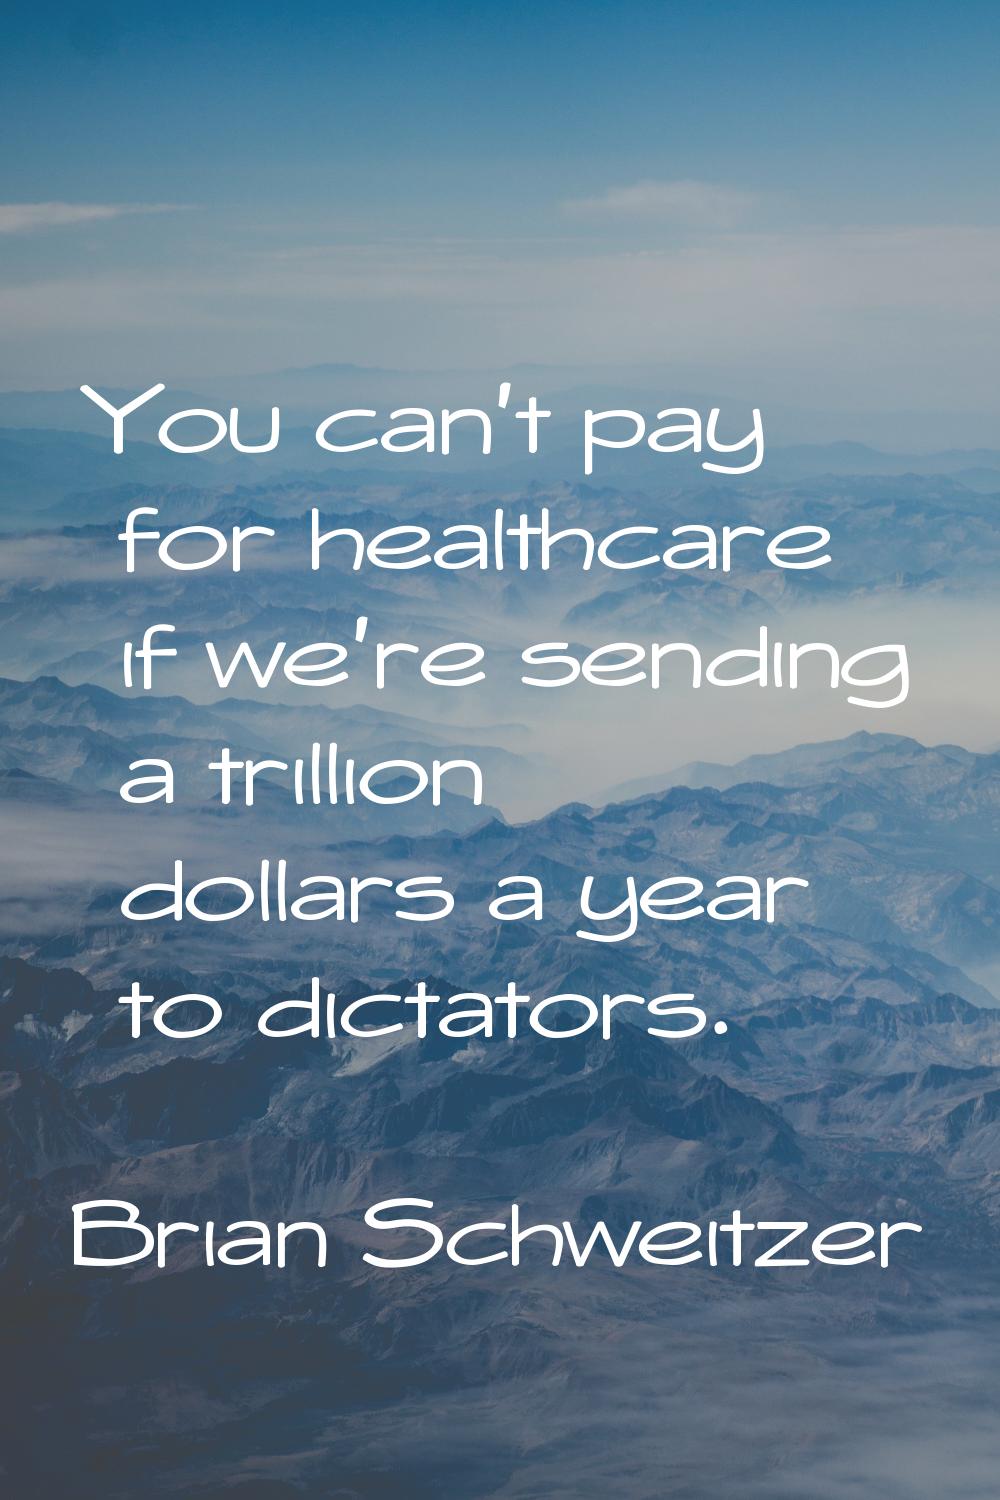 You can't pay for healthcare if we're sending a trillion dollars a year to dictators.